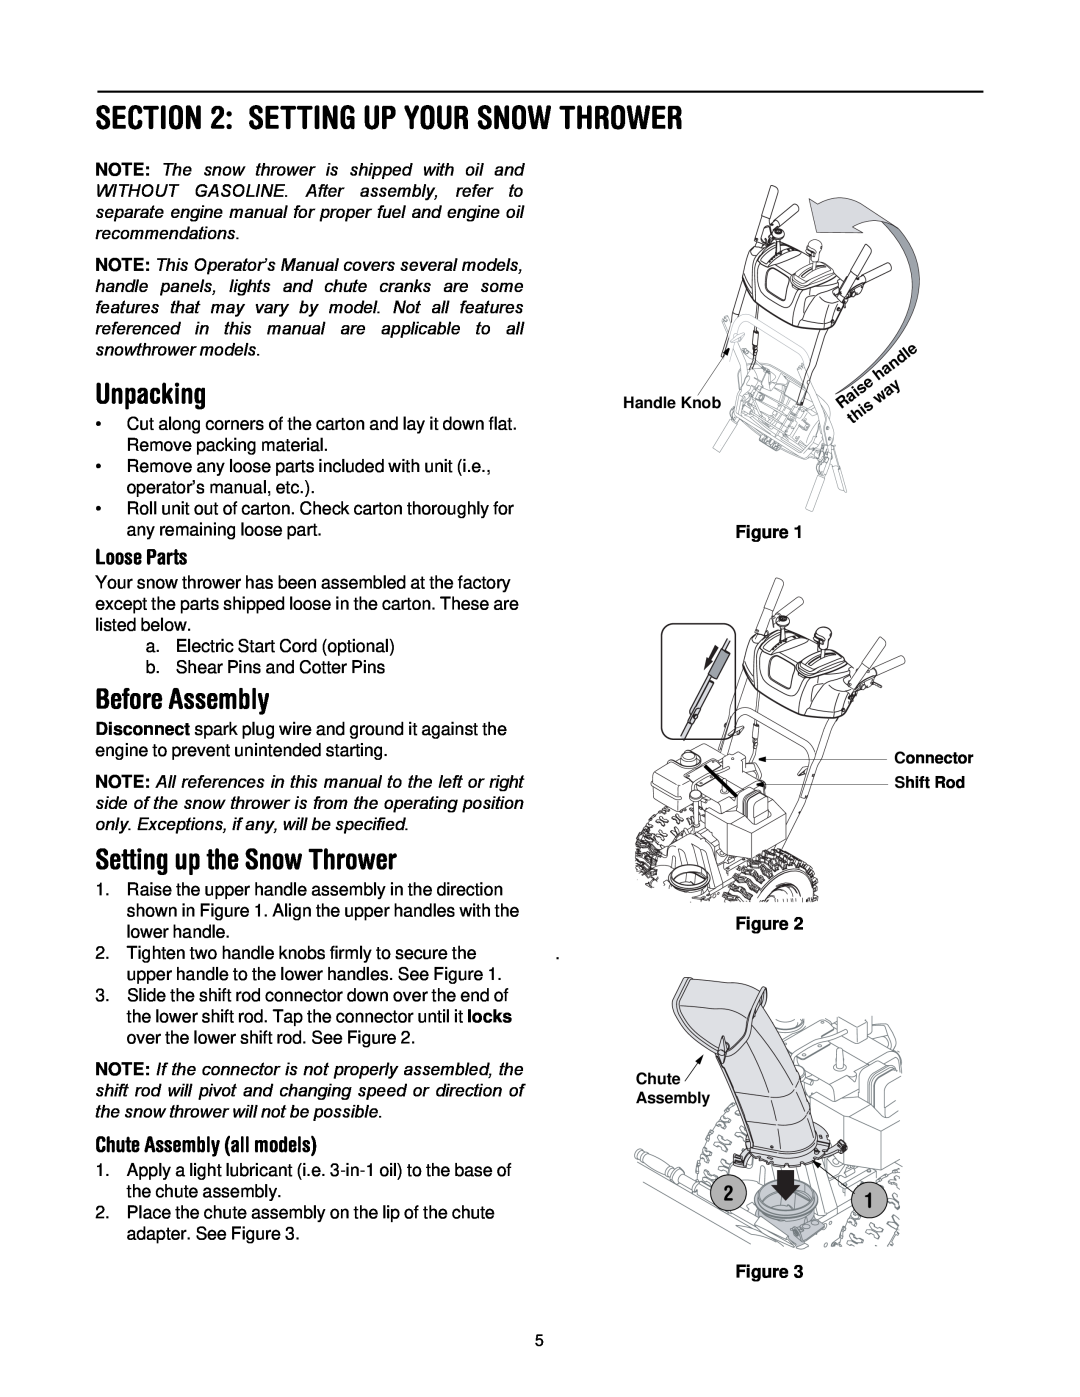 White Outdoor 500 manual Setting Up Your Snow Thrower, Unpacking, Before Assembly, Setting up the Snow Thrower, Loose Parts 